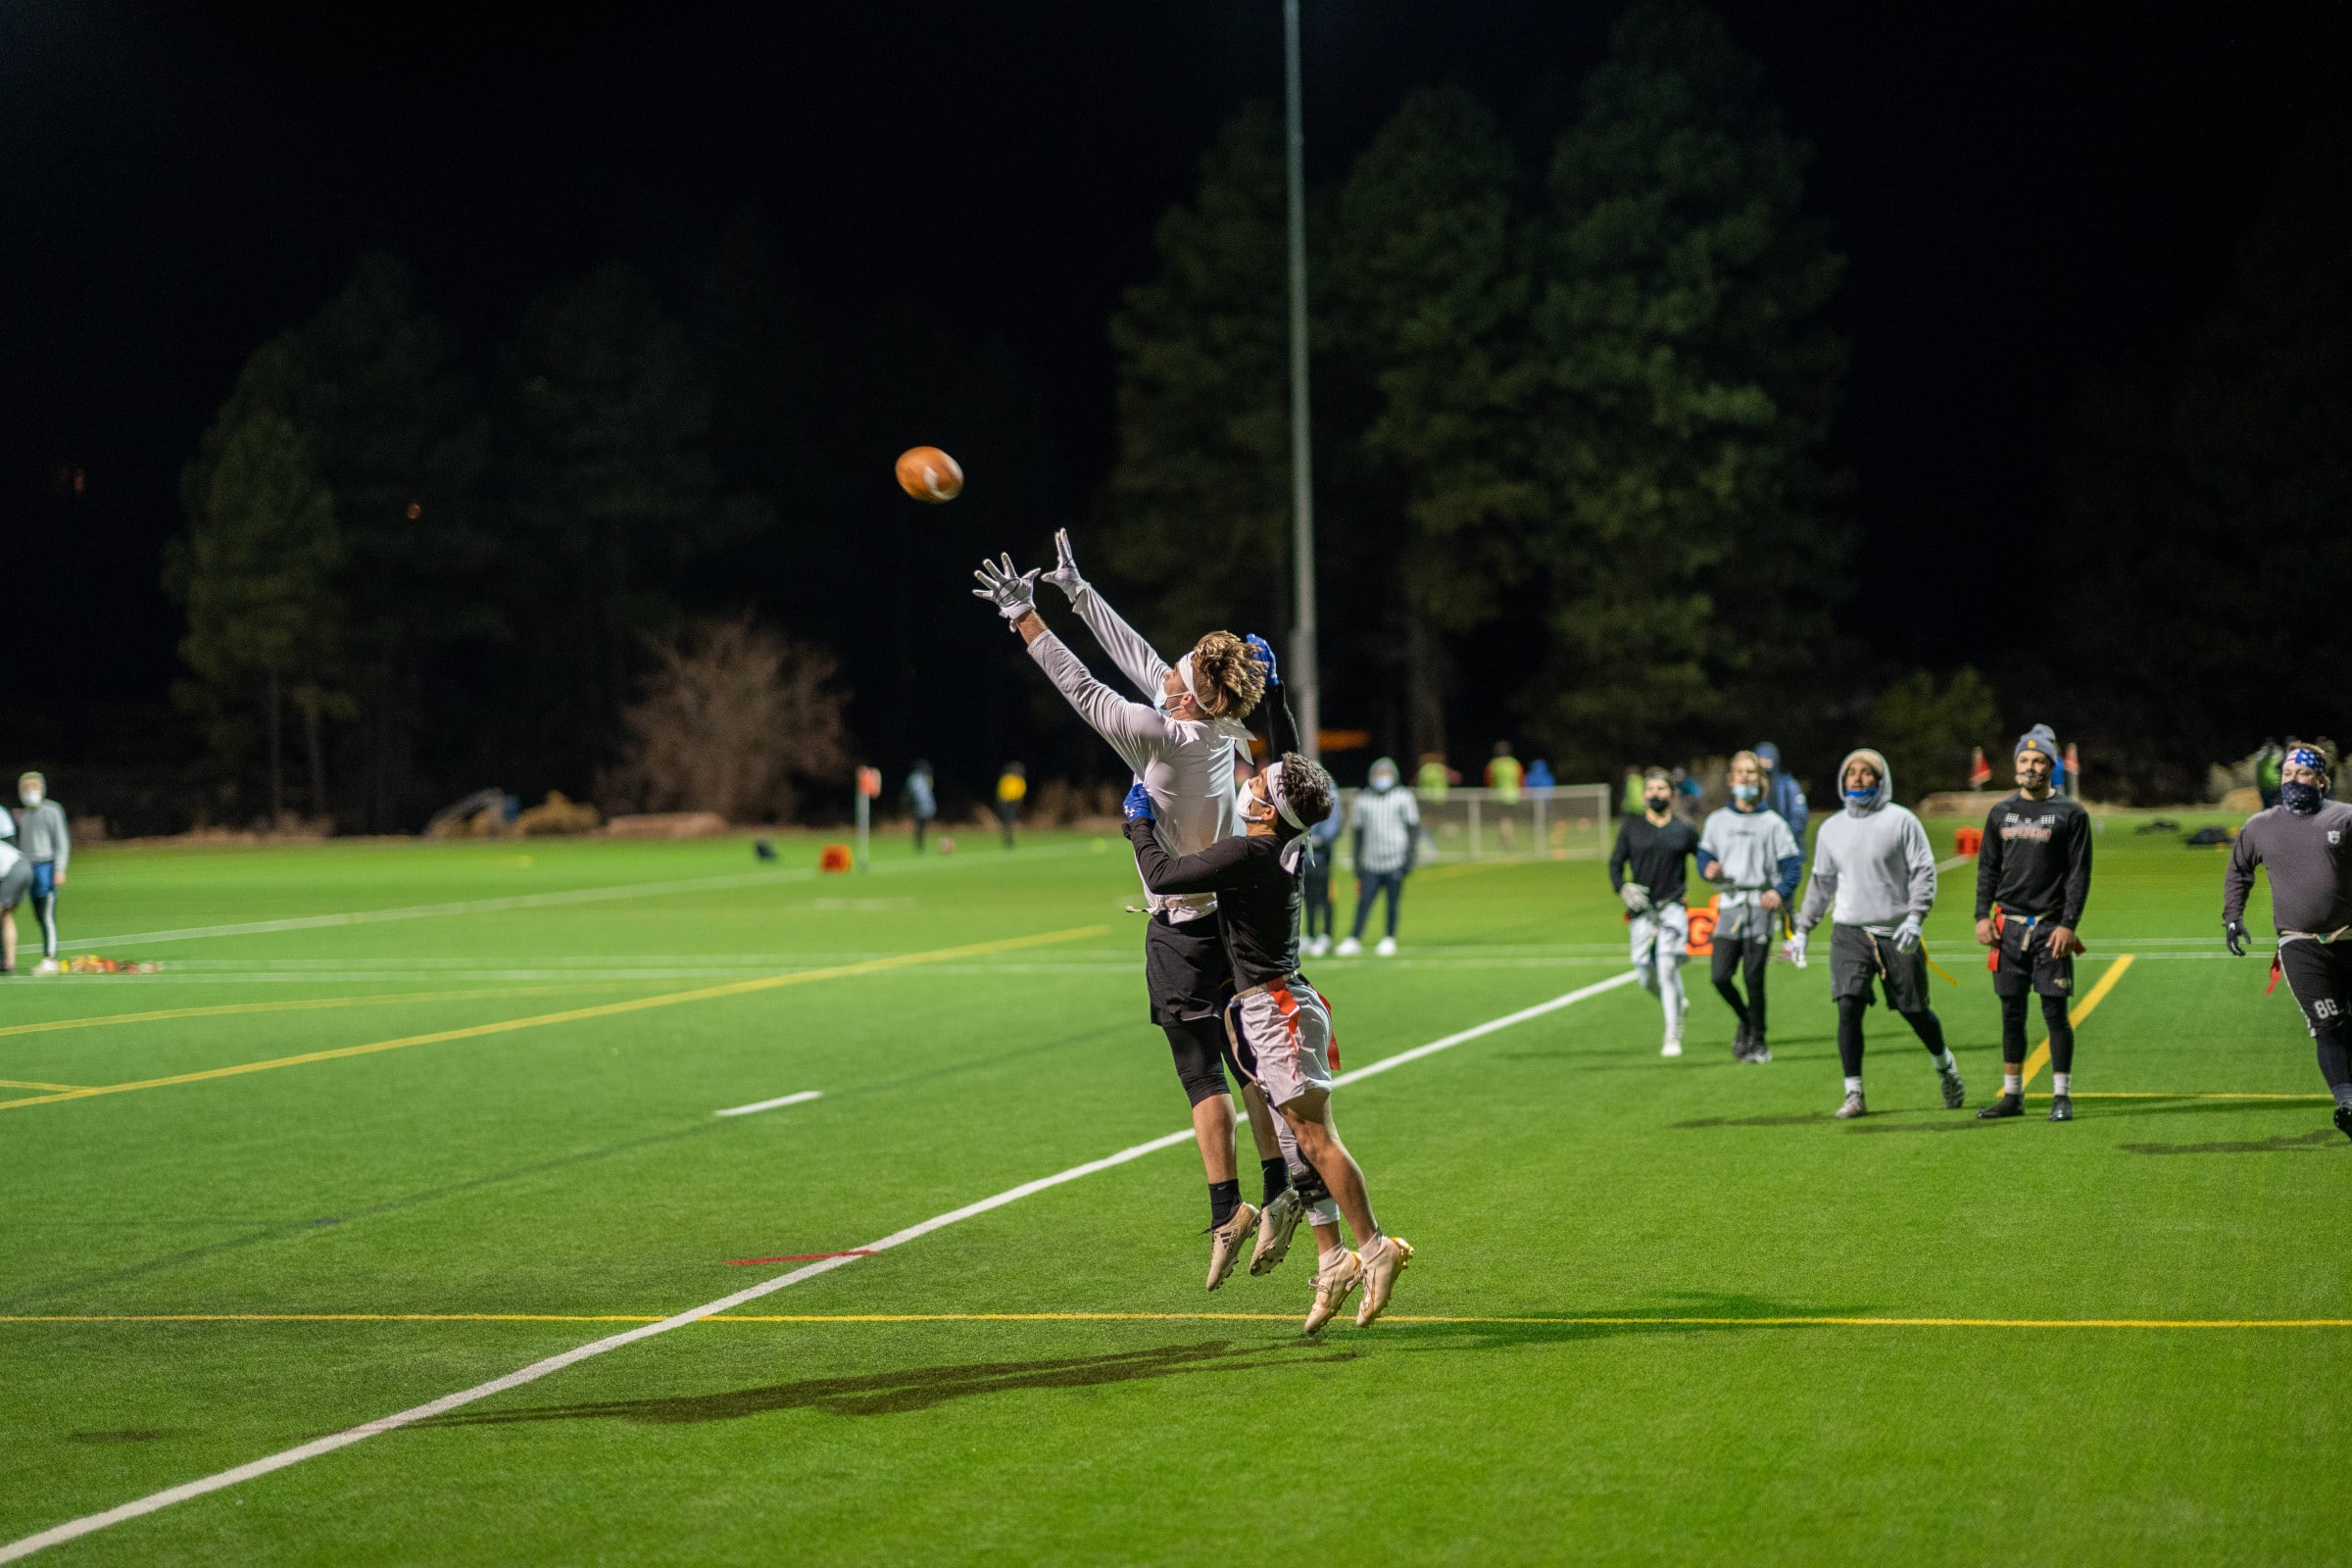 Student jumping in air to catch a football.